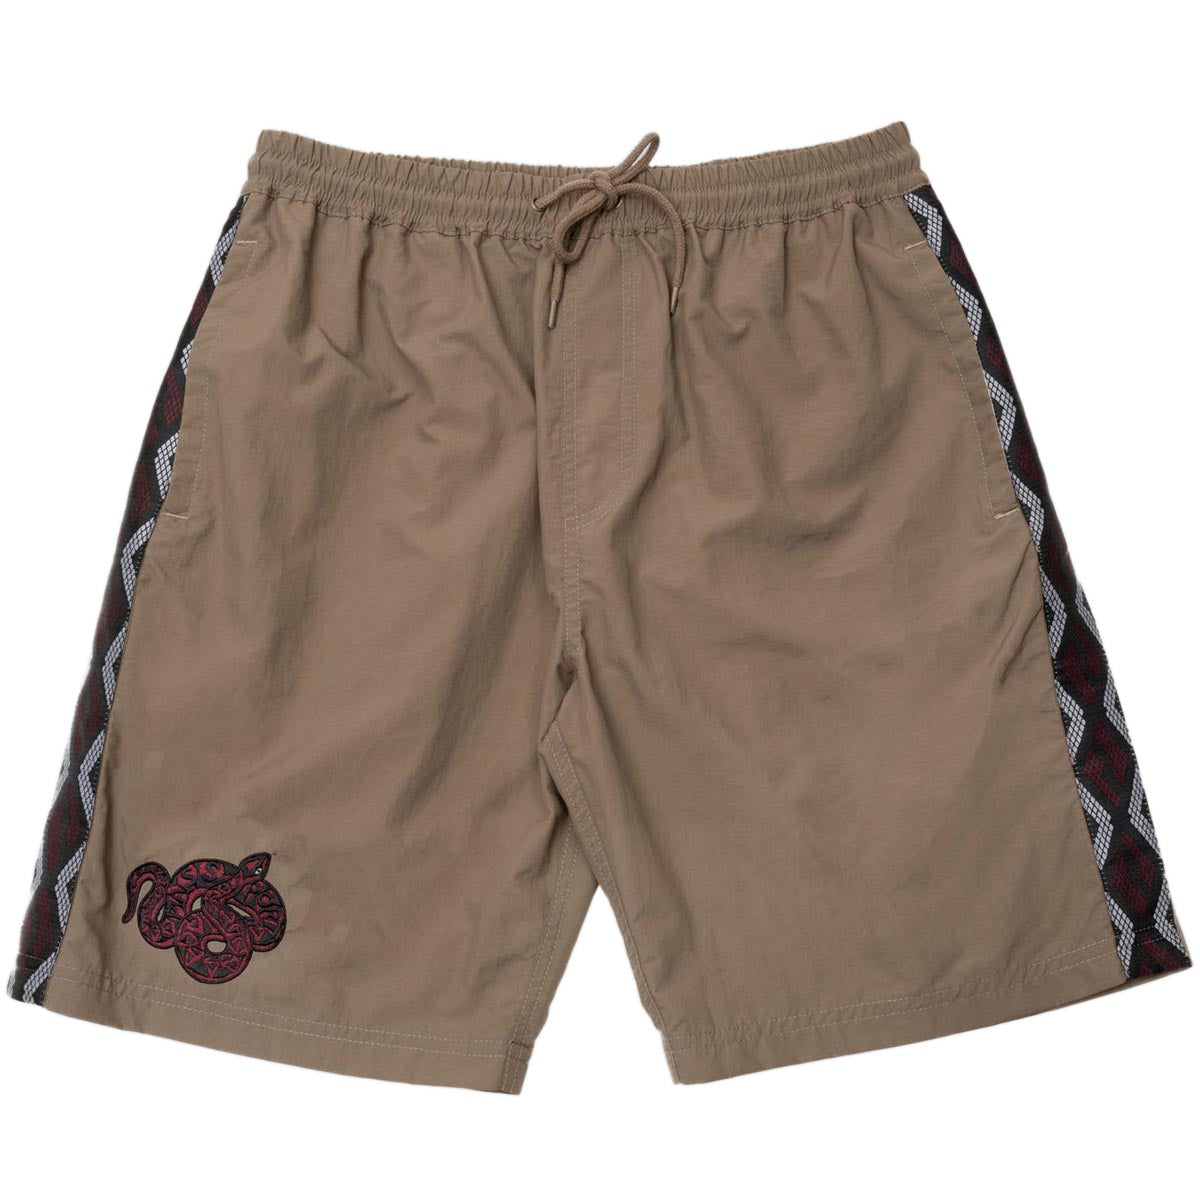 Passport Coiled RPET Casual Shorts - Sand image 1